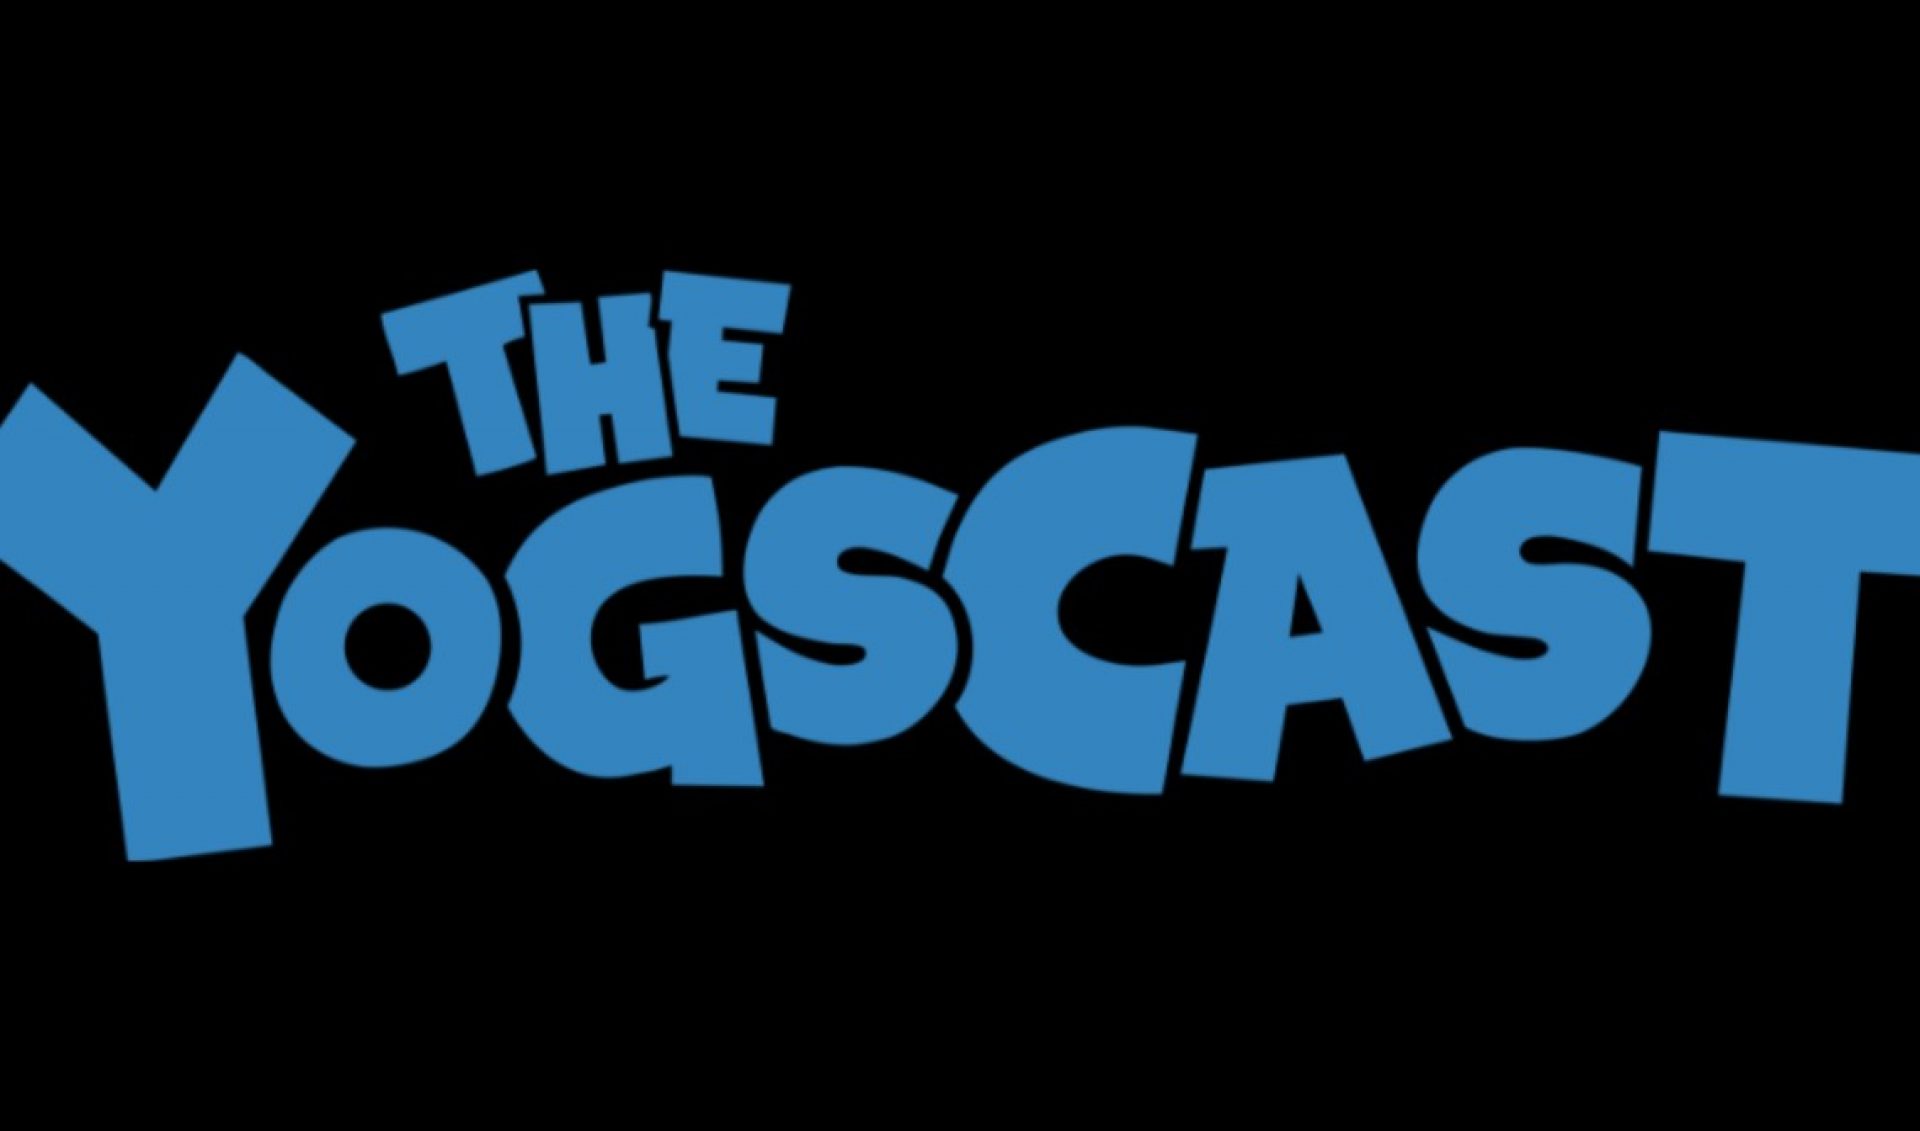 Rooster Teeth Forges Multi-Faceted Pact With U.K. Digital Gaming Brand ‘The Yogscast’